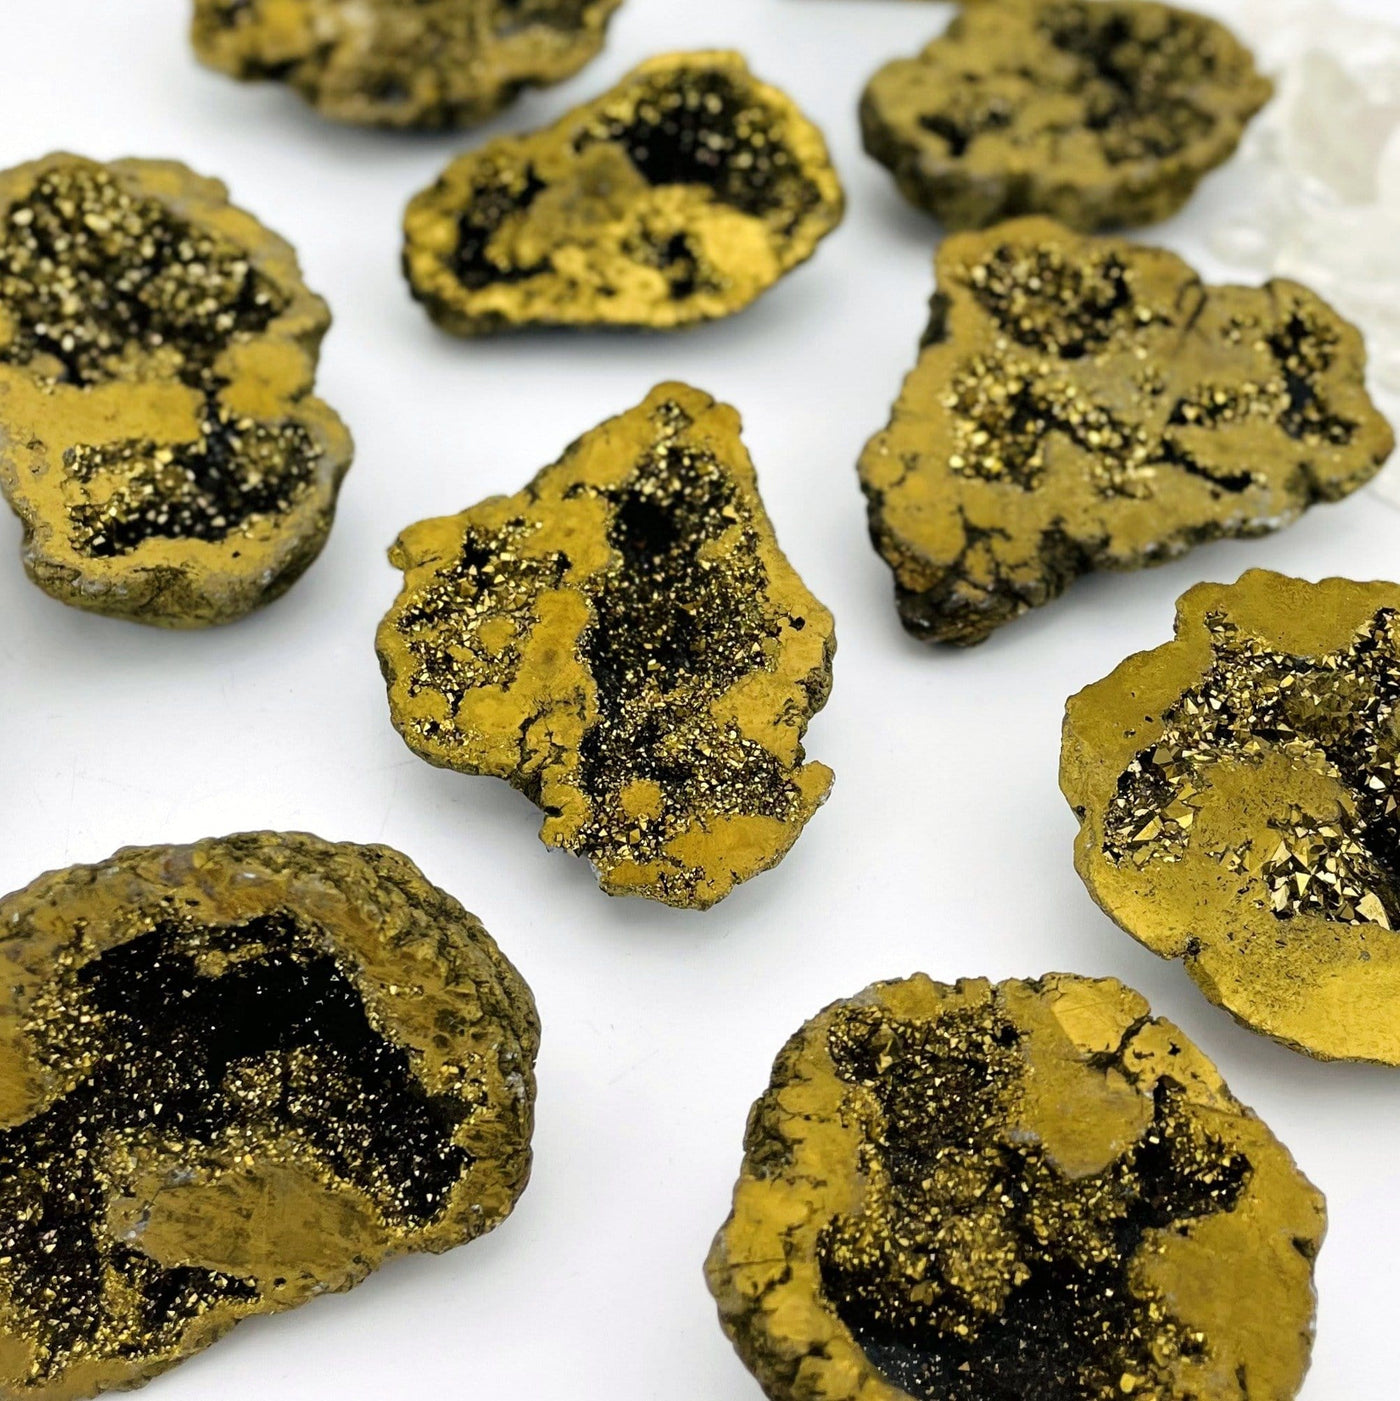 Various Gold Half geodes laid out for size and color reference